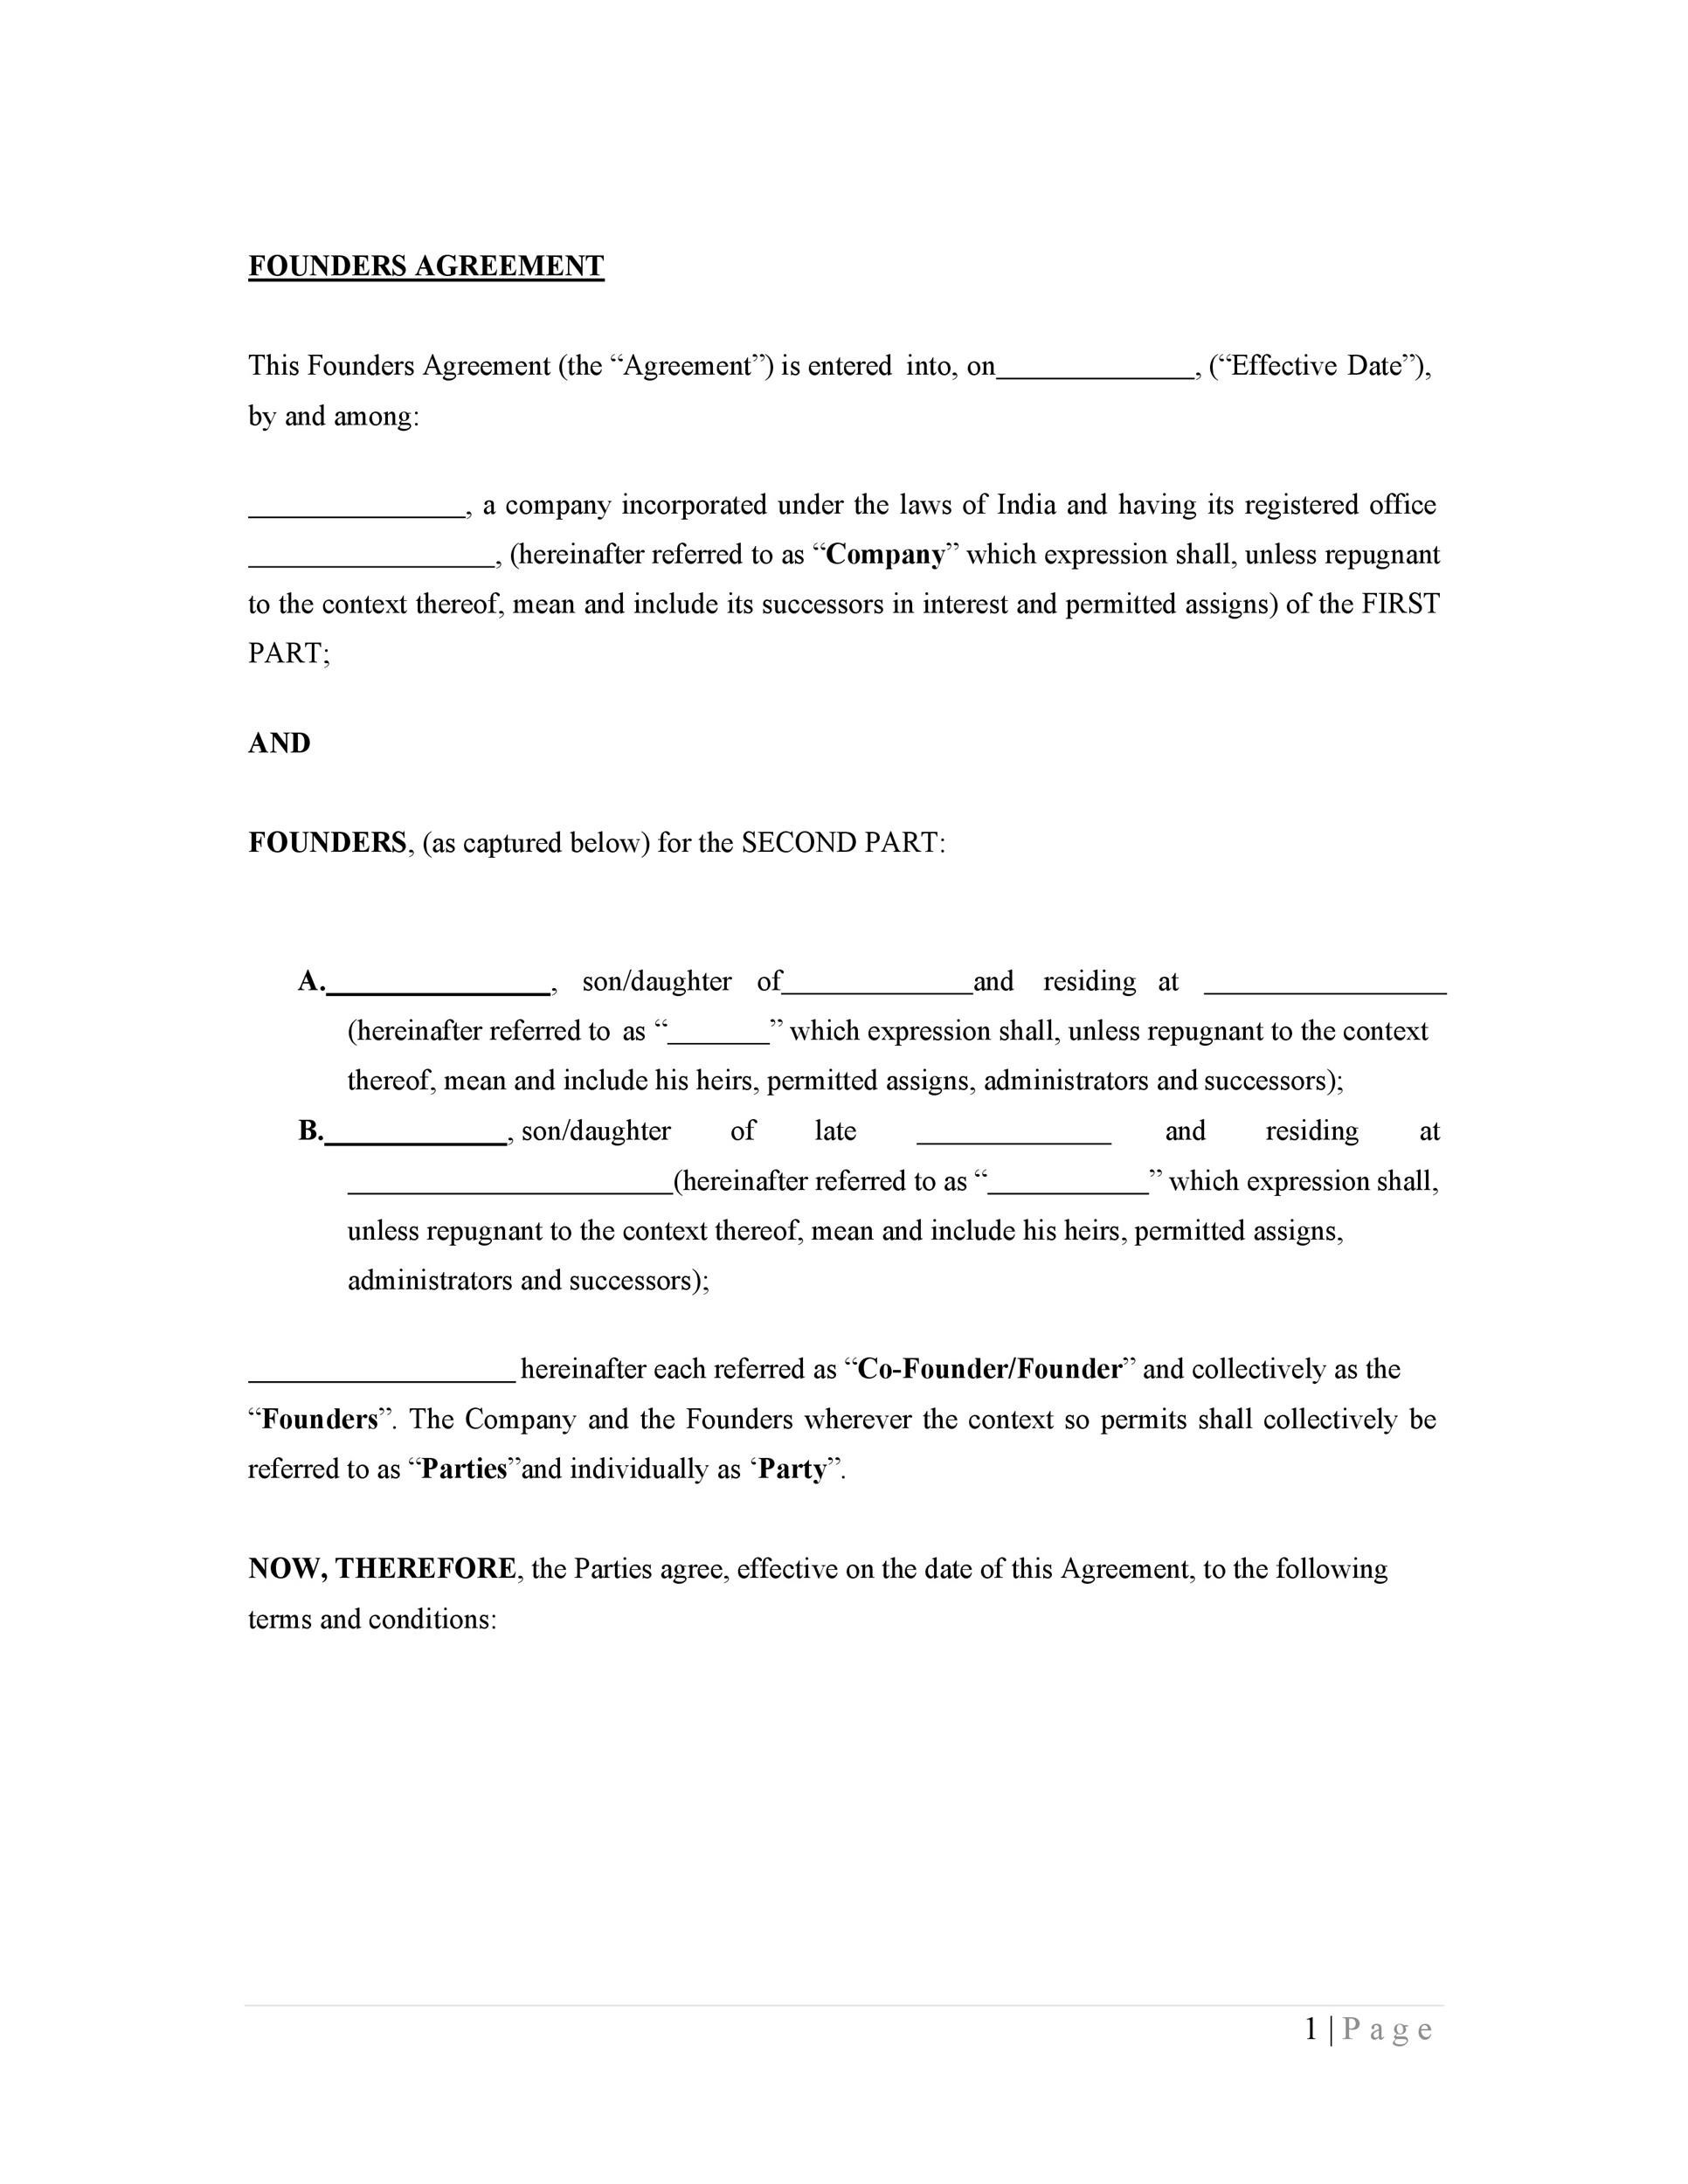 Free founders agreement 05